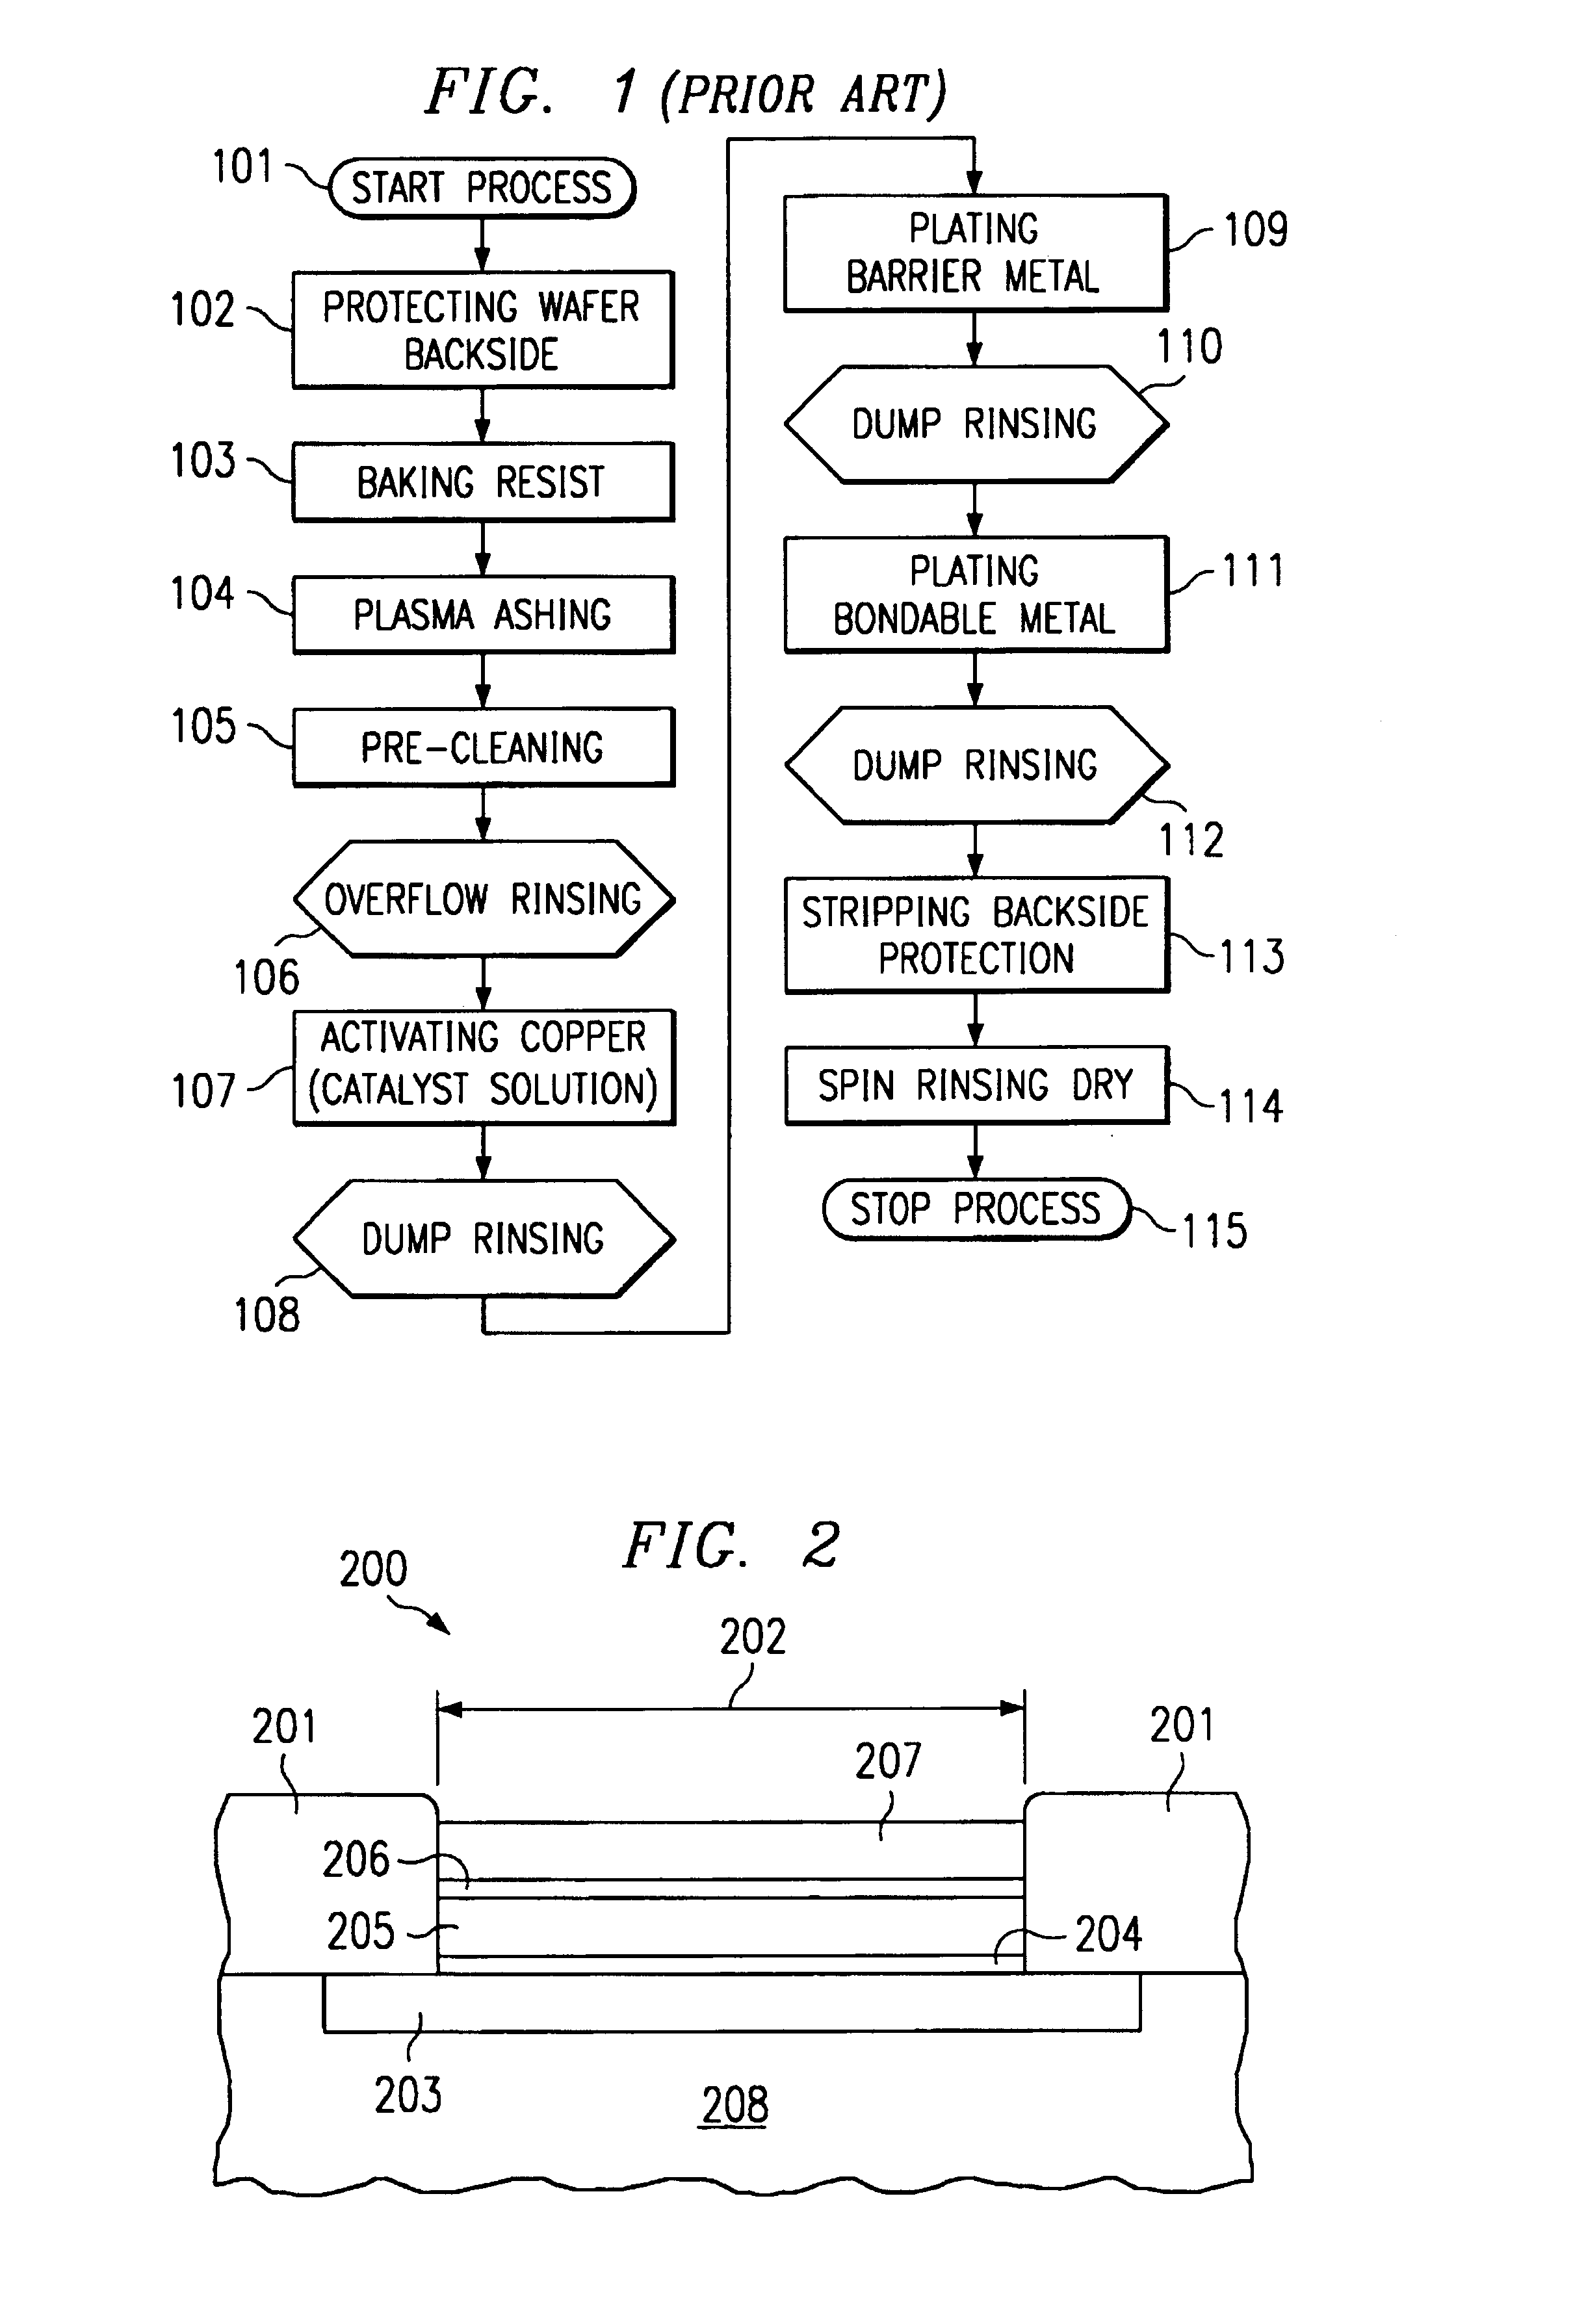 Method to achieve continuous hydrogen saturation in sparingly used electroless nickel plating process